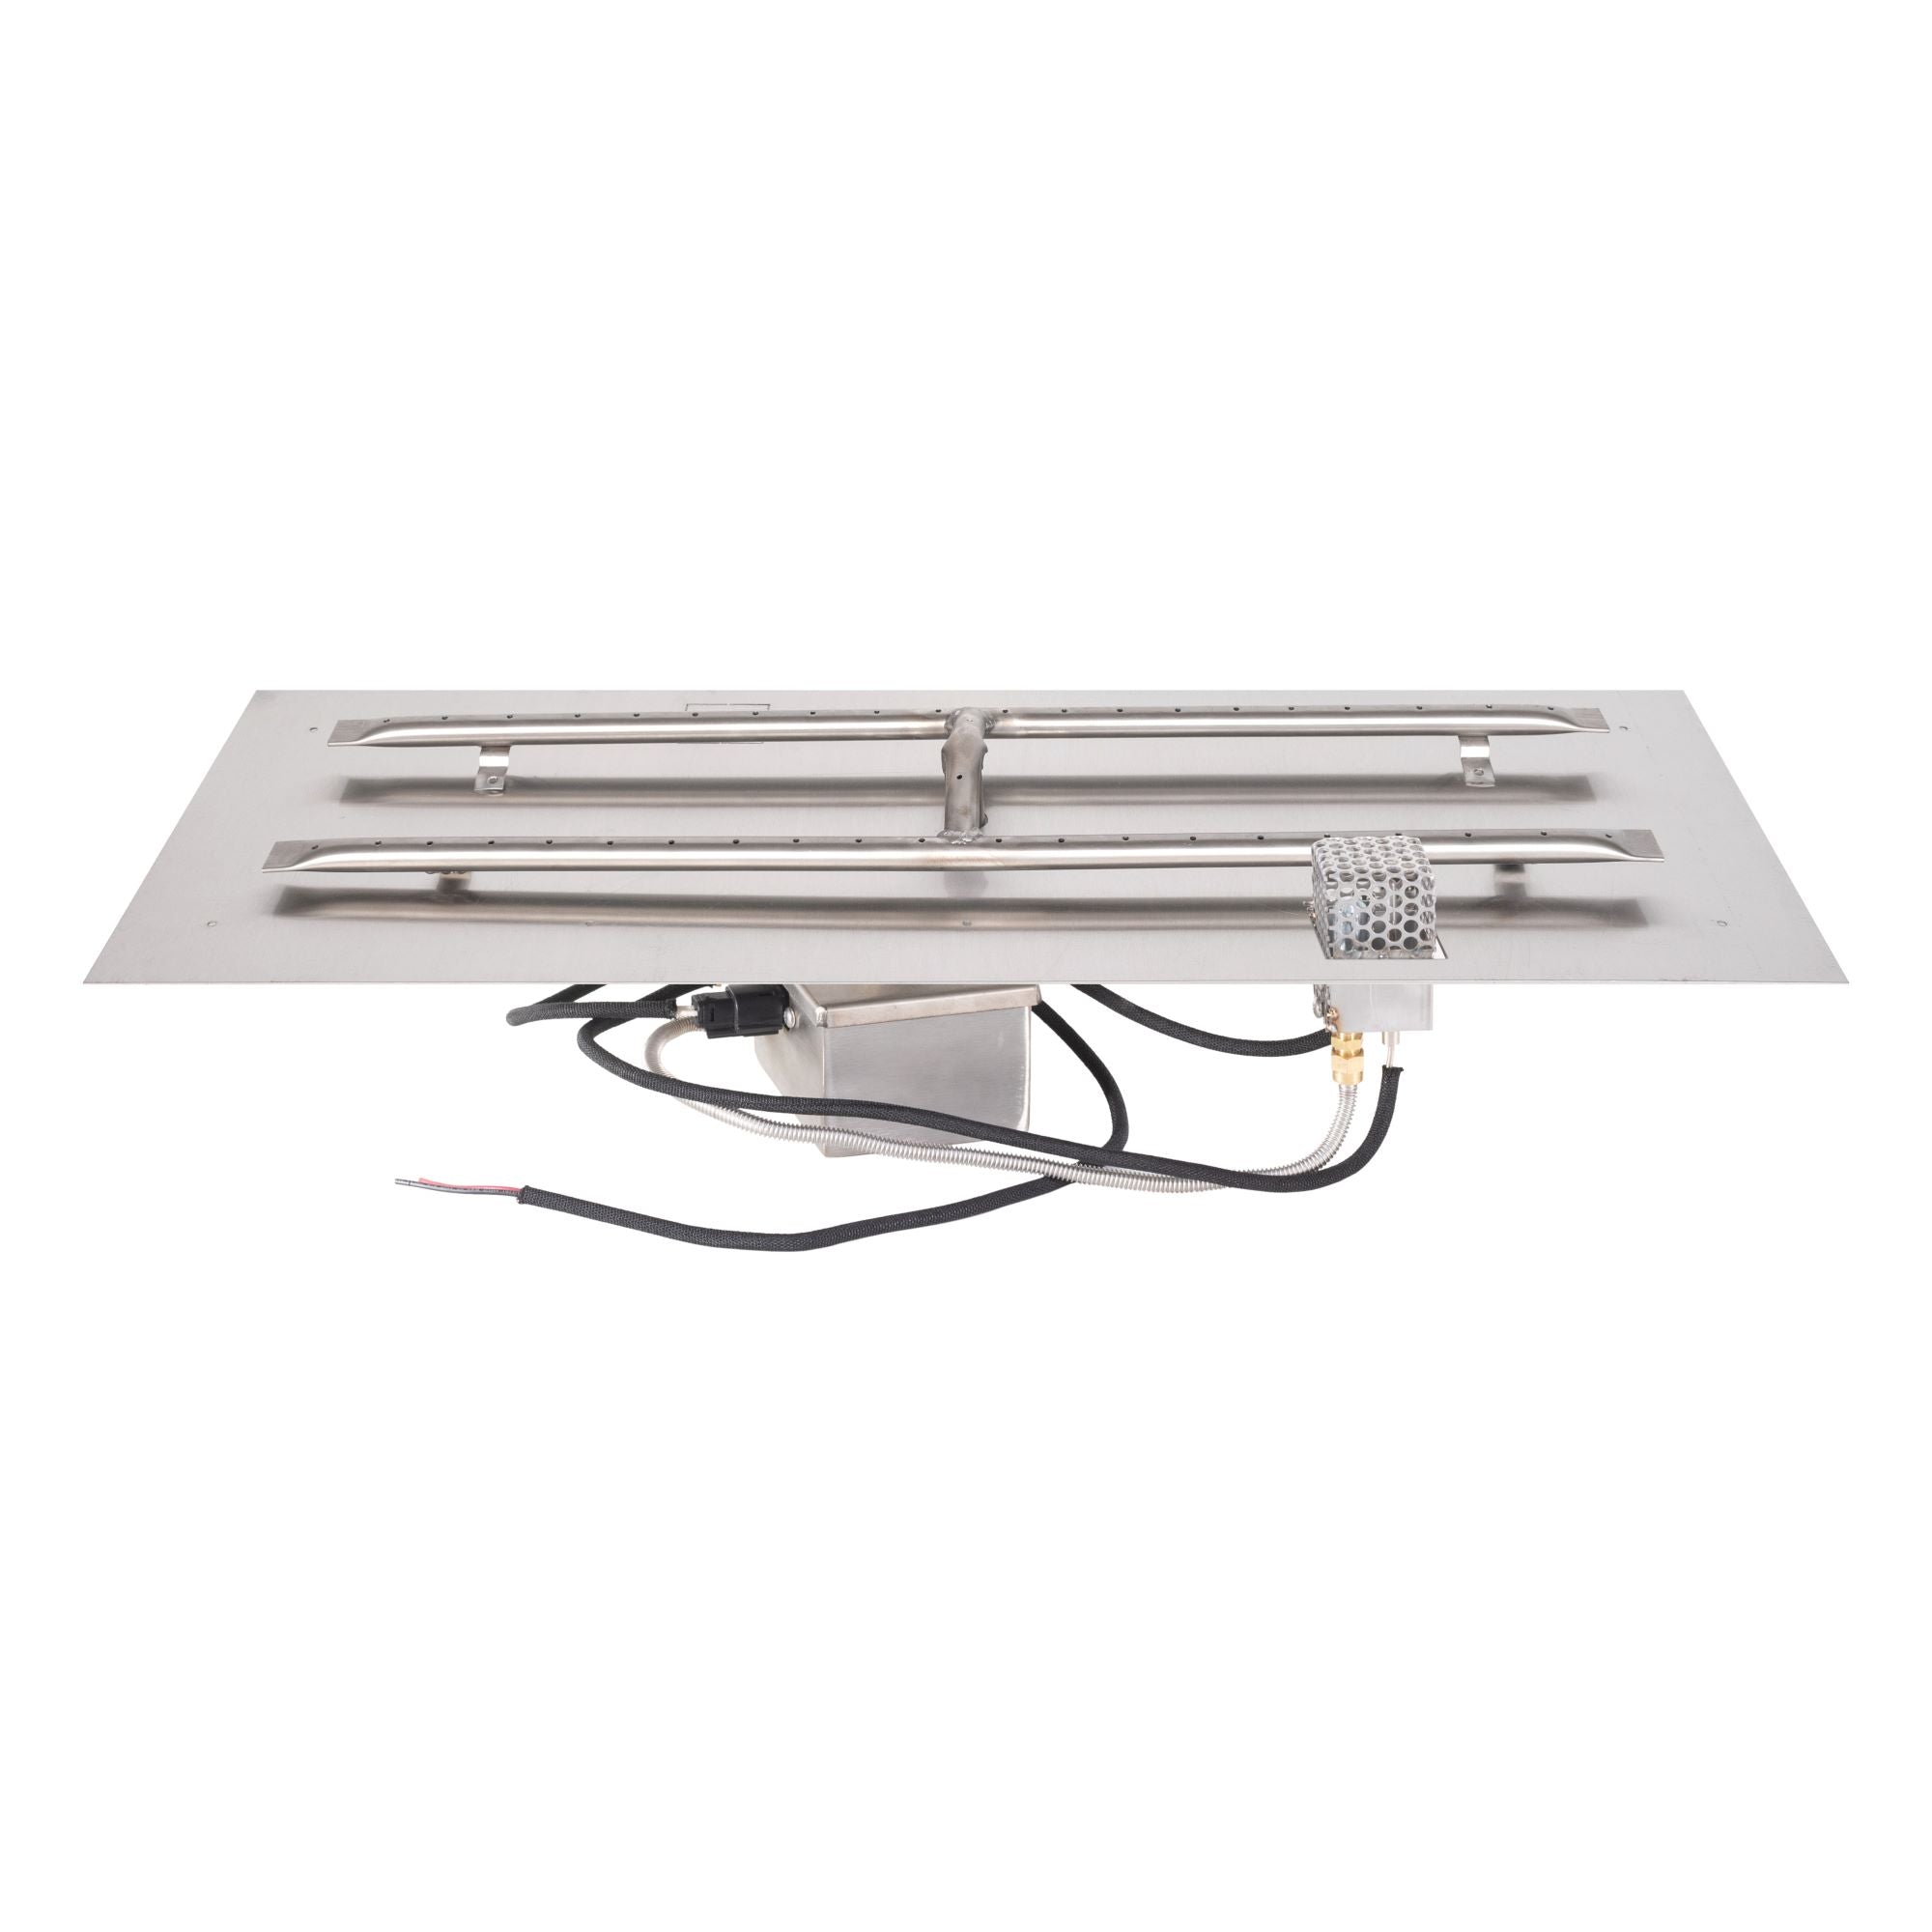 The Outdoor Plus Rectangular Flat Pan 18" With Stainless Steel 'H' Burner